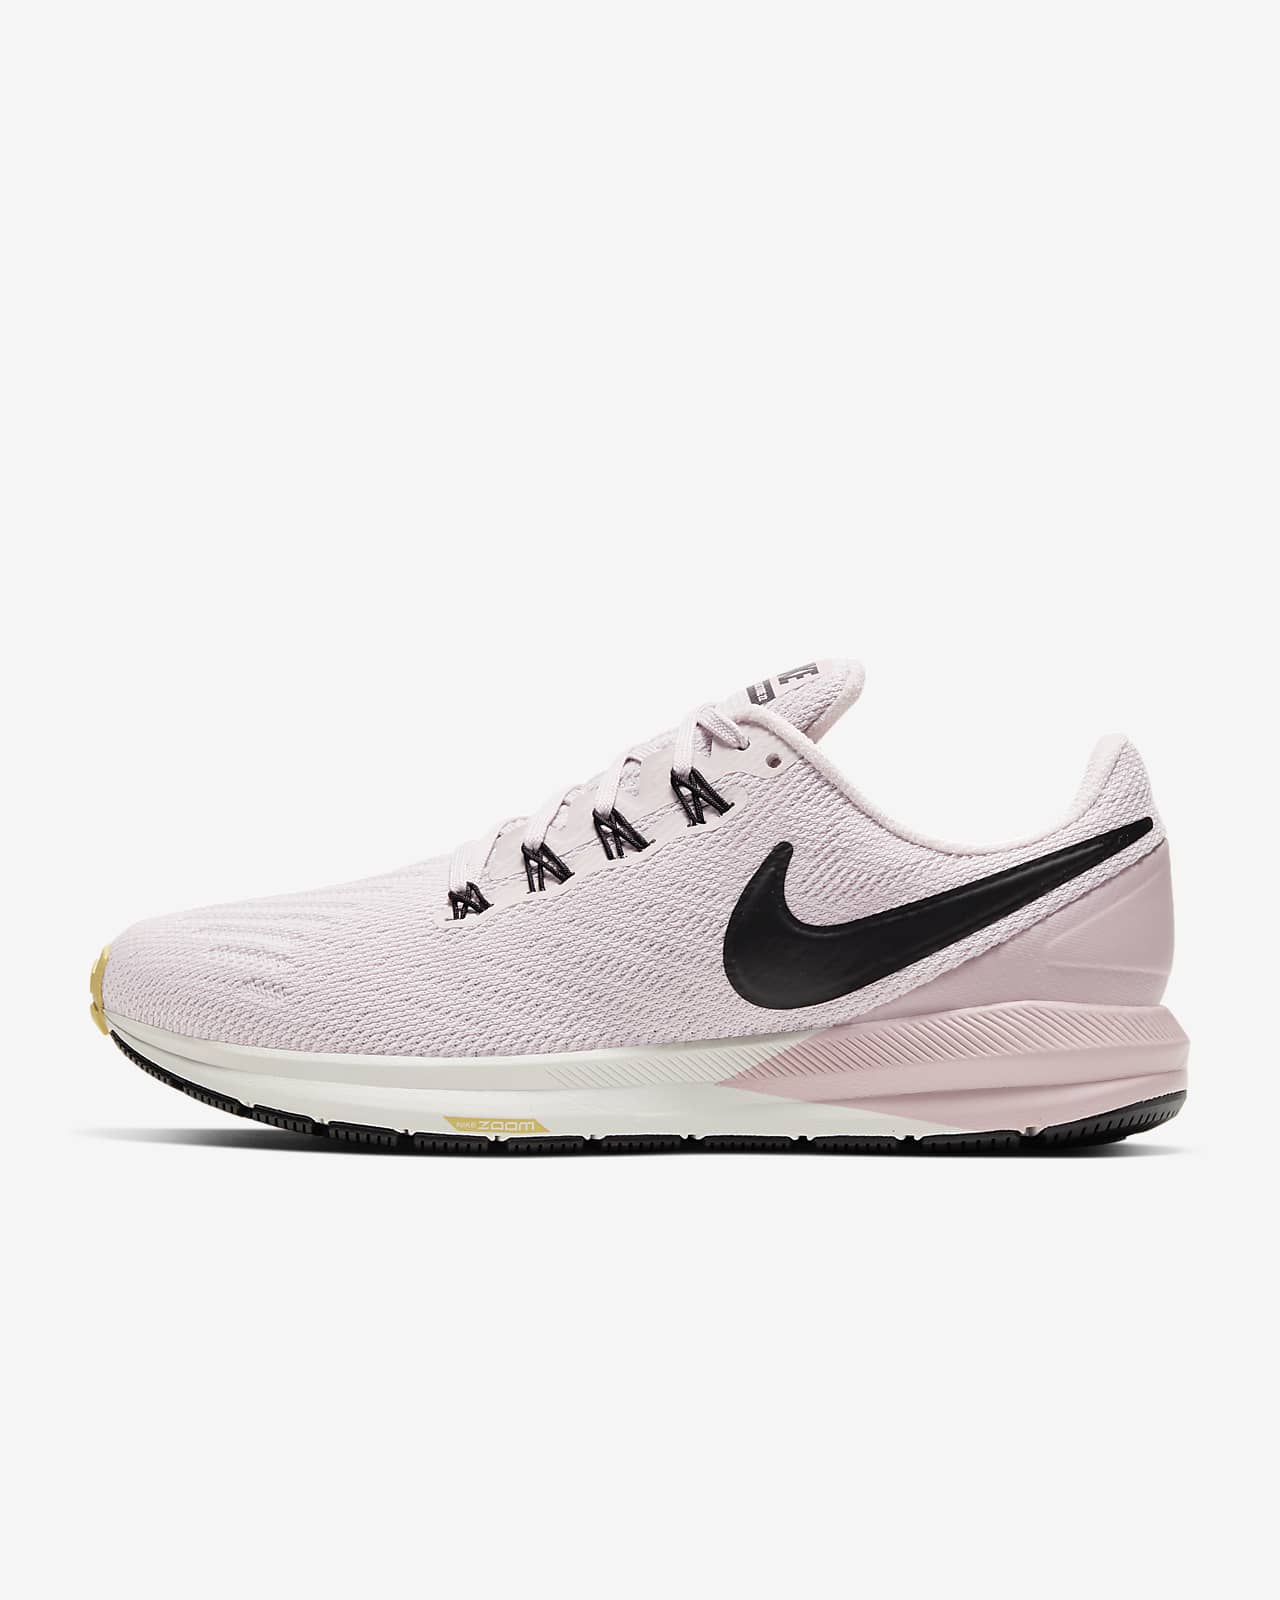 nike zoom structure 20 womens